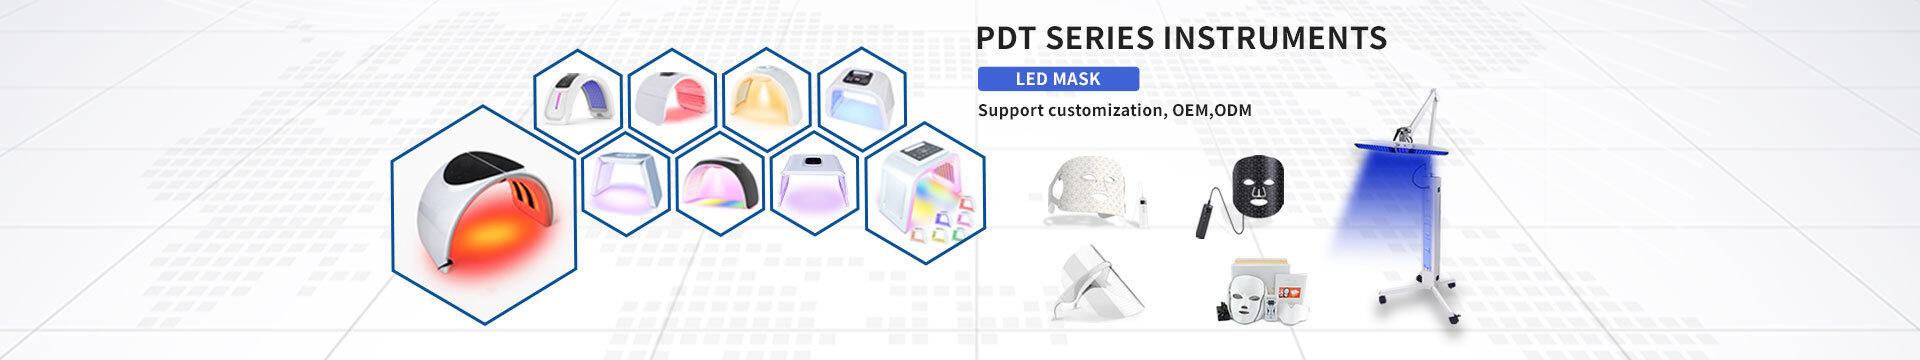 7 in 1 led light therapy machine, 7 color led face mask light therapy, hydro facial machine professional 7 in 1